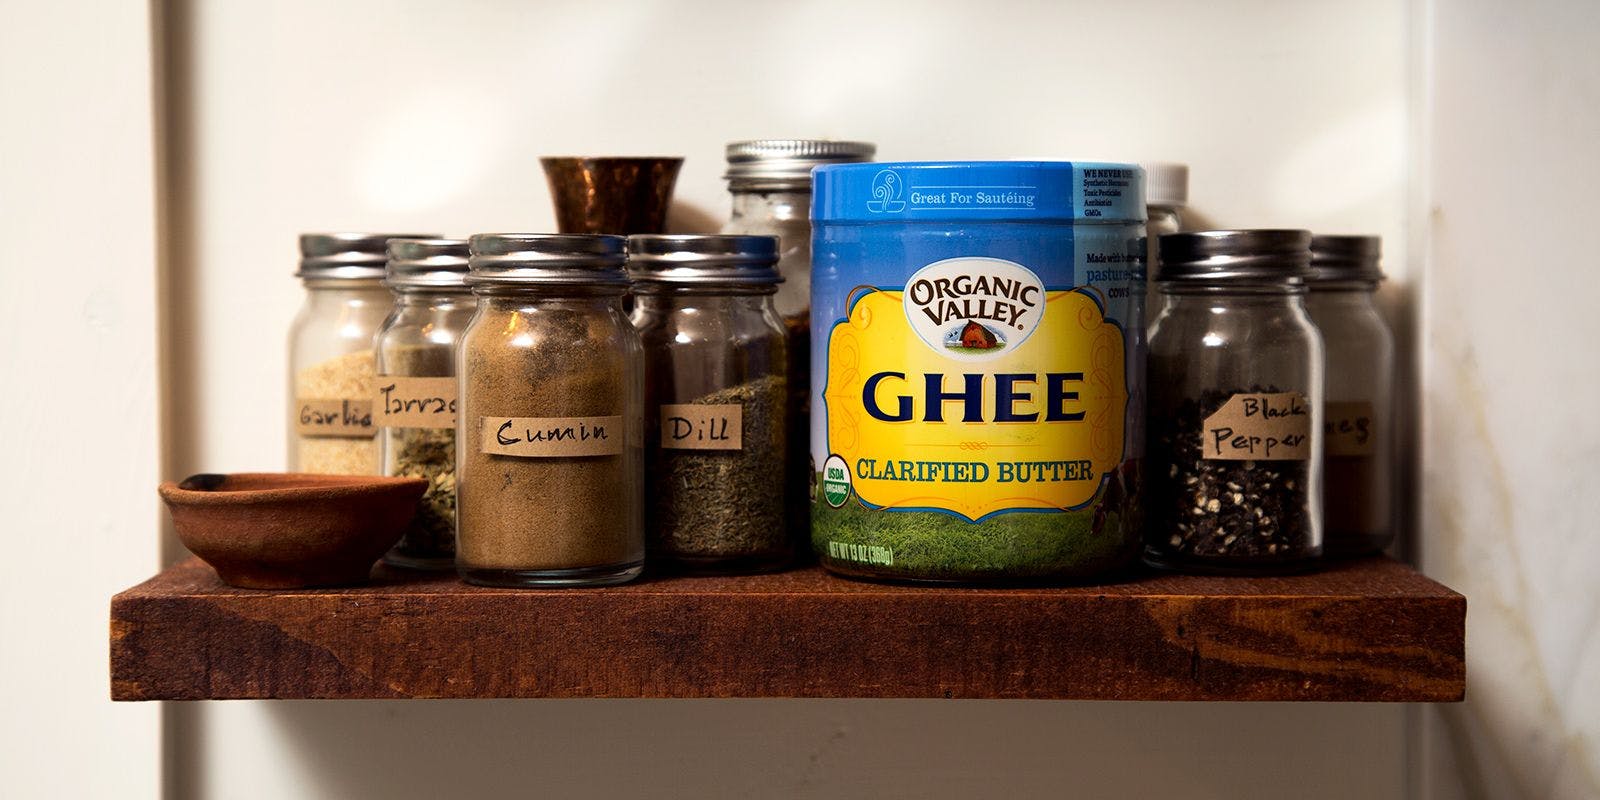 Organic Valley Ghee on a pantry shelf with spices.